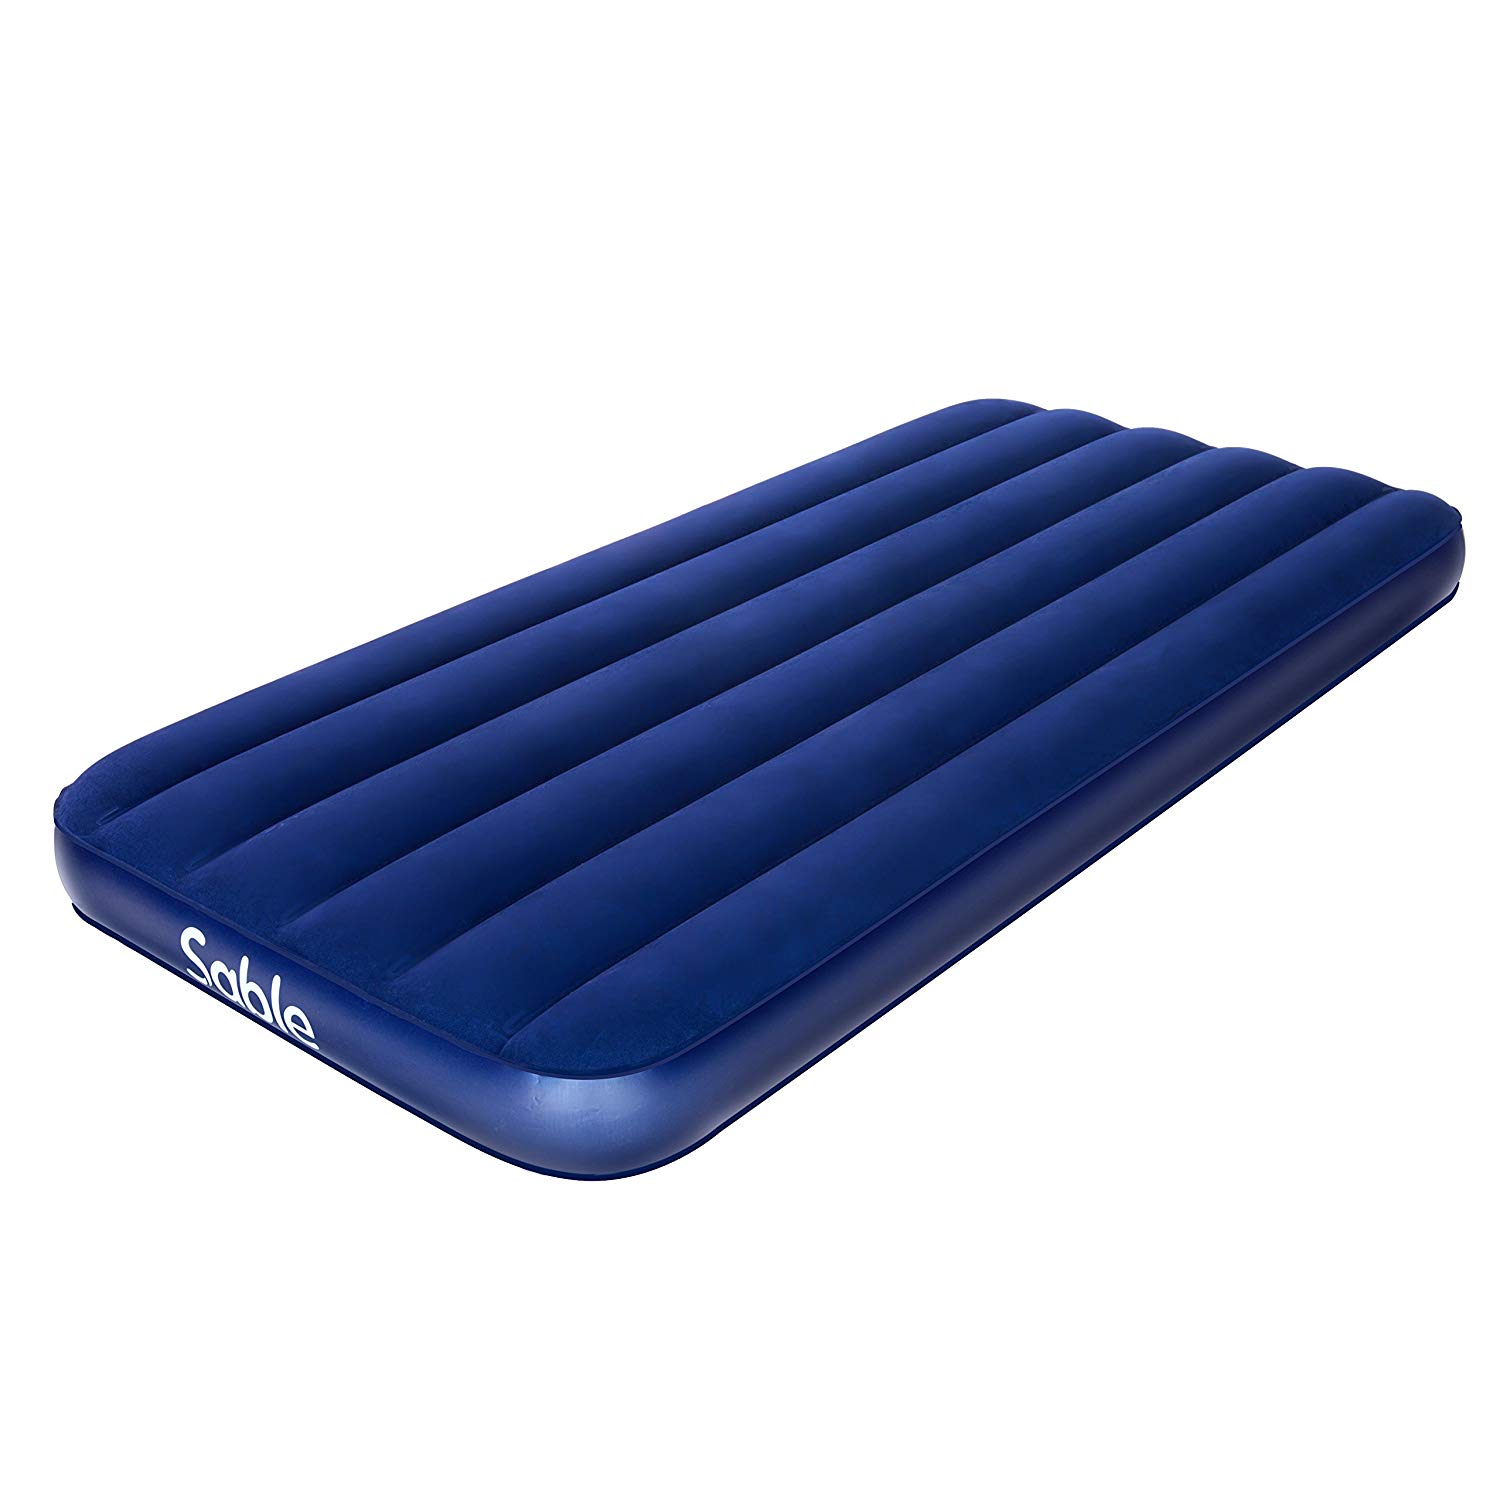 AIOIAI Camping Air Mattress, Inflatable AirBed Blow up Bed for Guest Car Tent Camping Hiking Backpacking with Storage Bag - Height 8